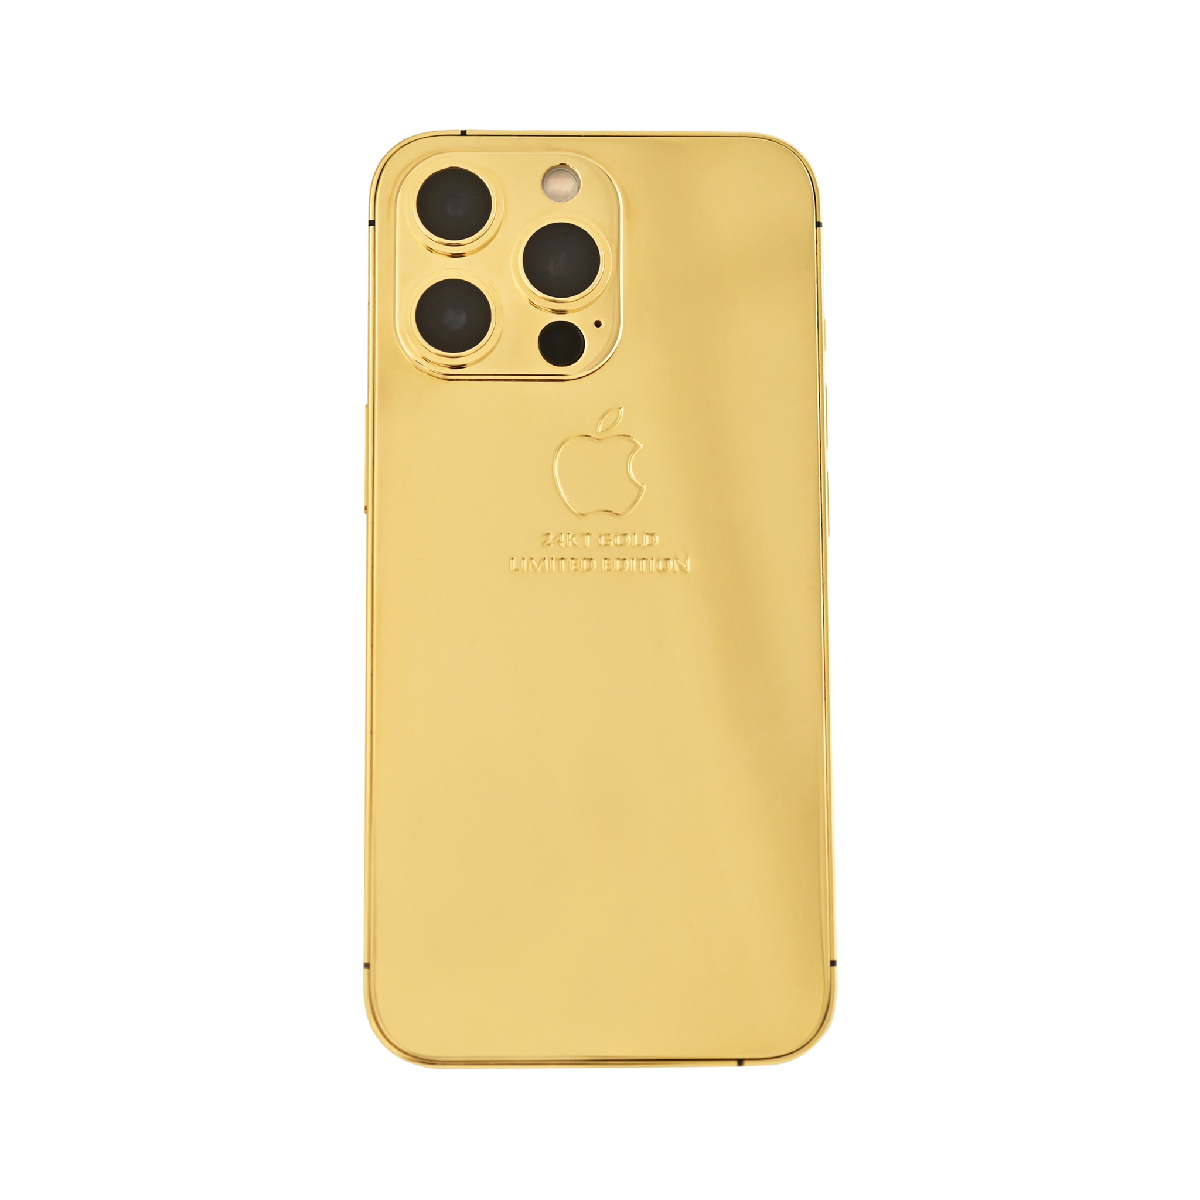 Caviar Luxury 24k Full Gold Customized iPhone 14 Pro 1 TB Limited Edition